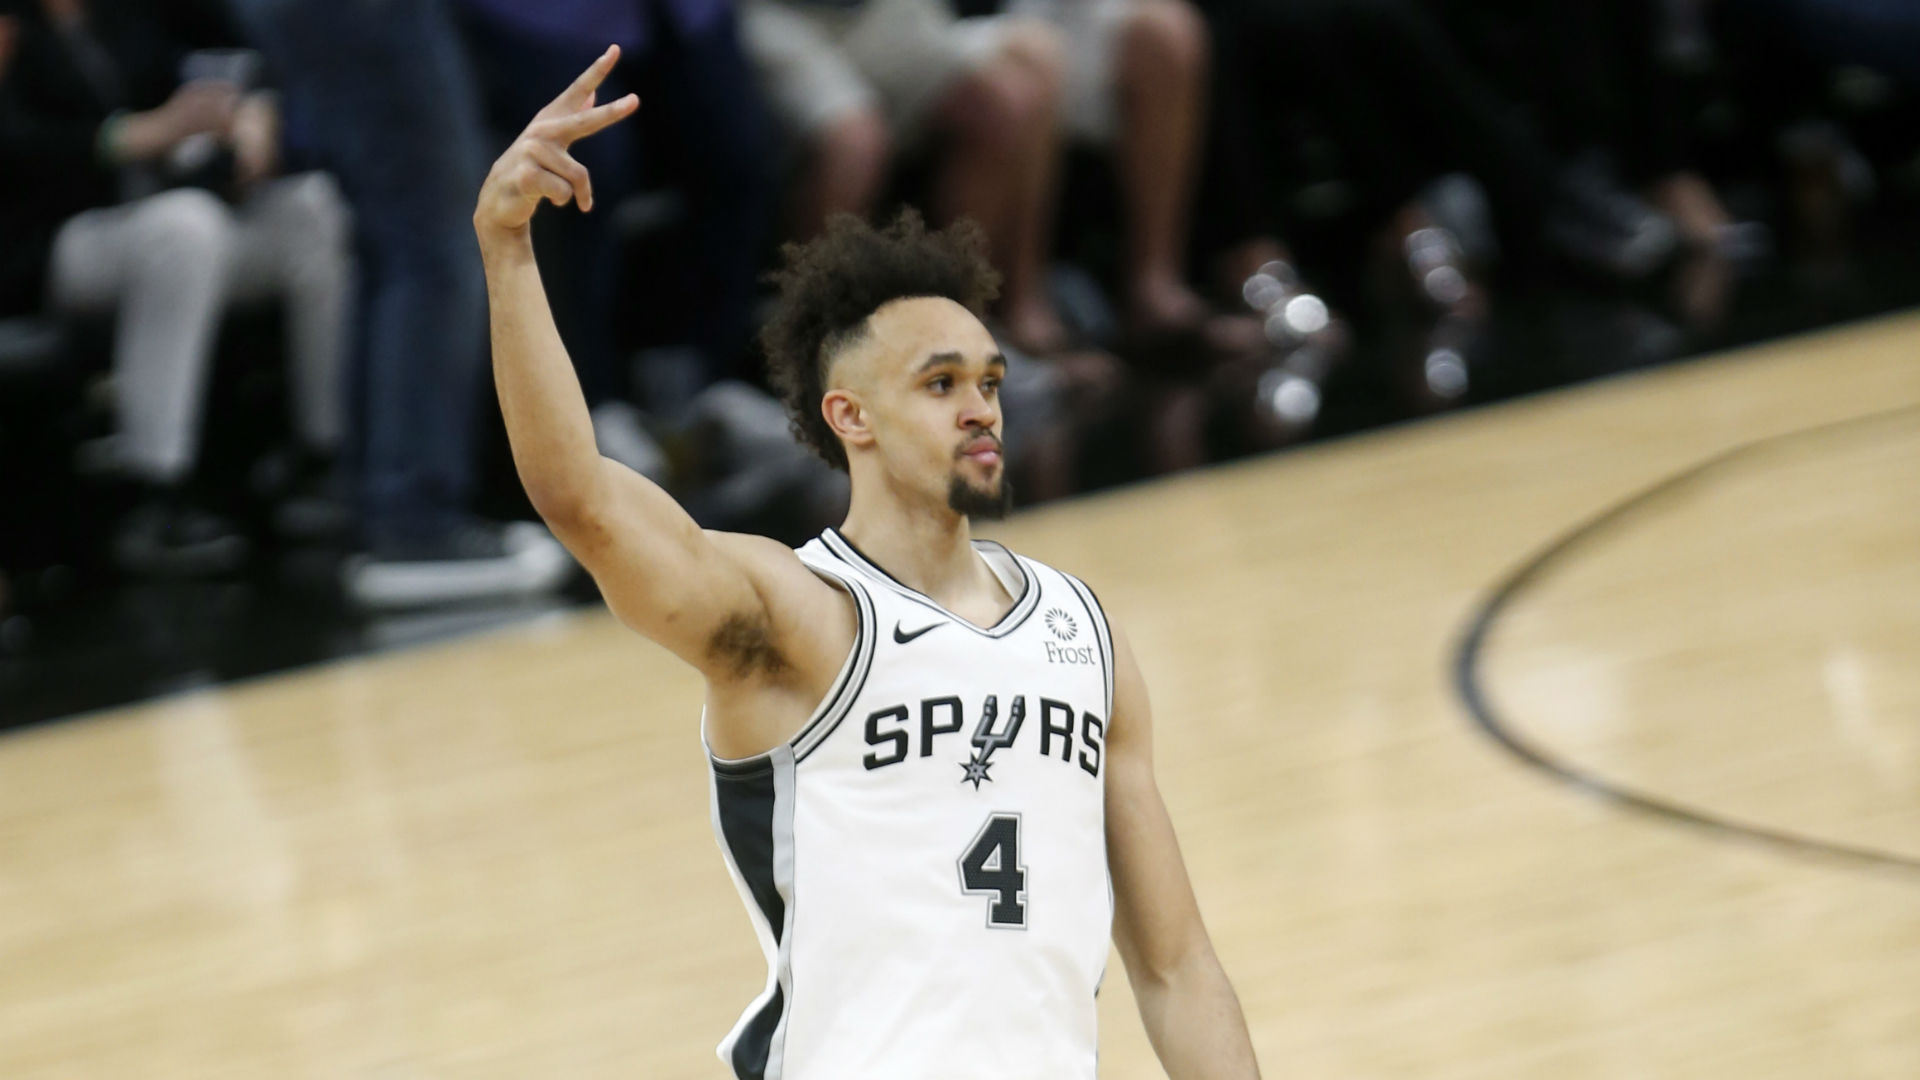 Mike Malone is eager for his Denver Nuggets team to respond after they were undone by San Antonio Spurs guard Derrick White.